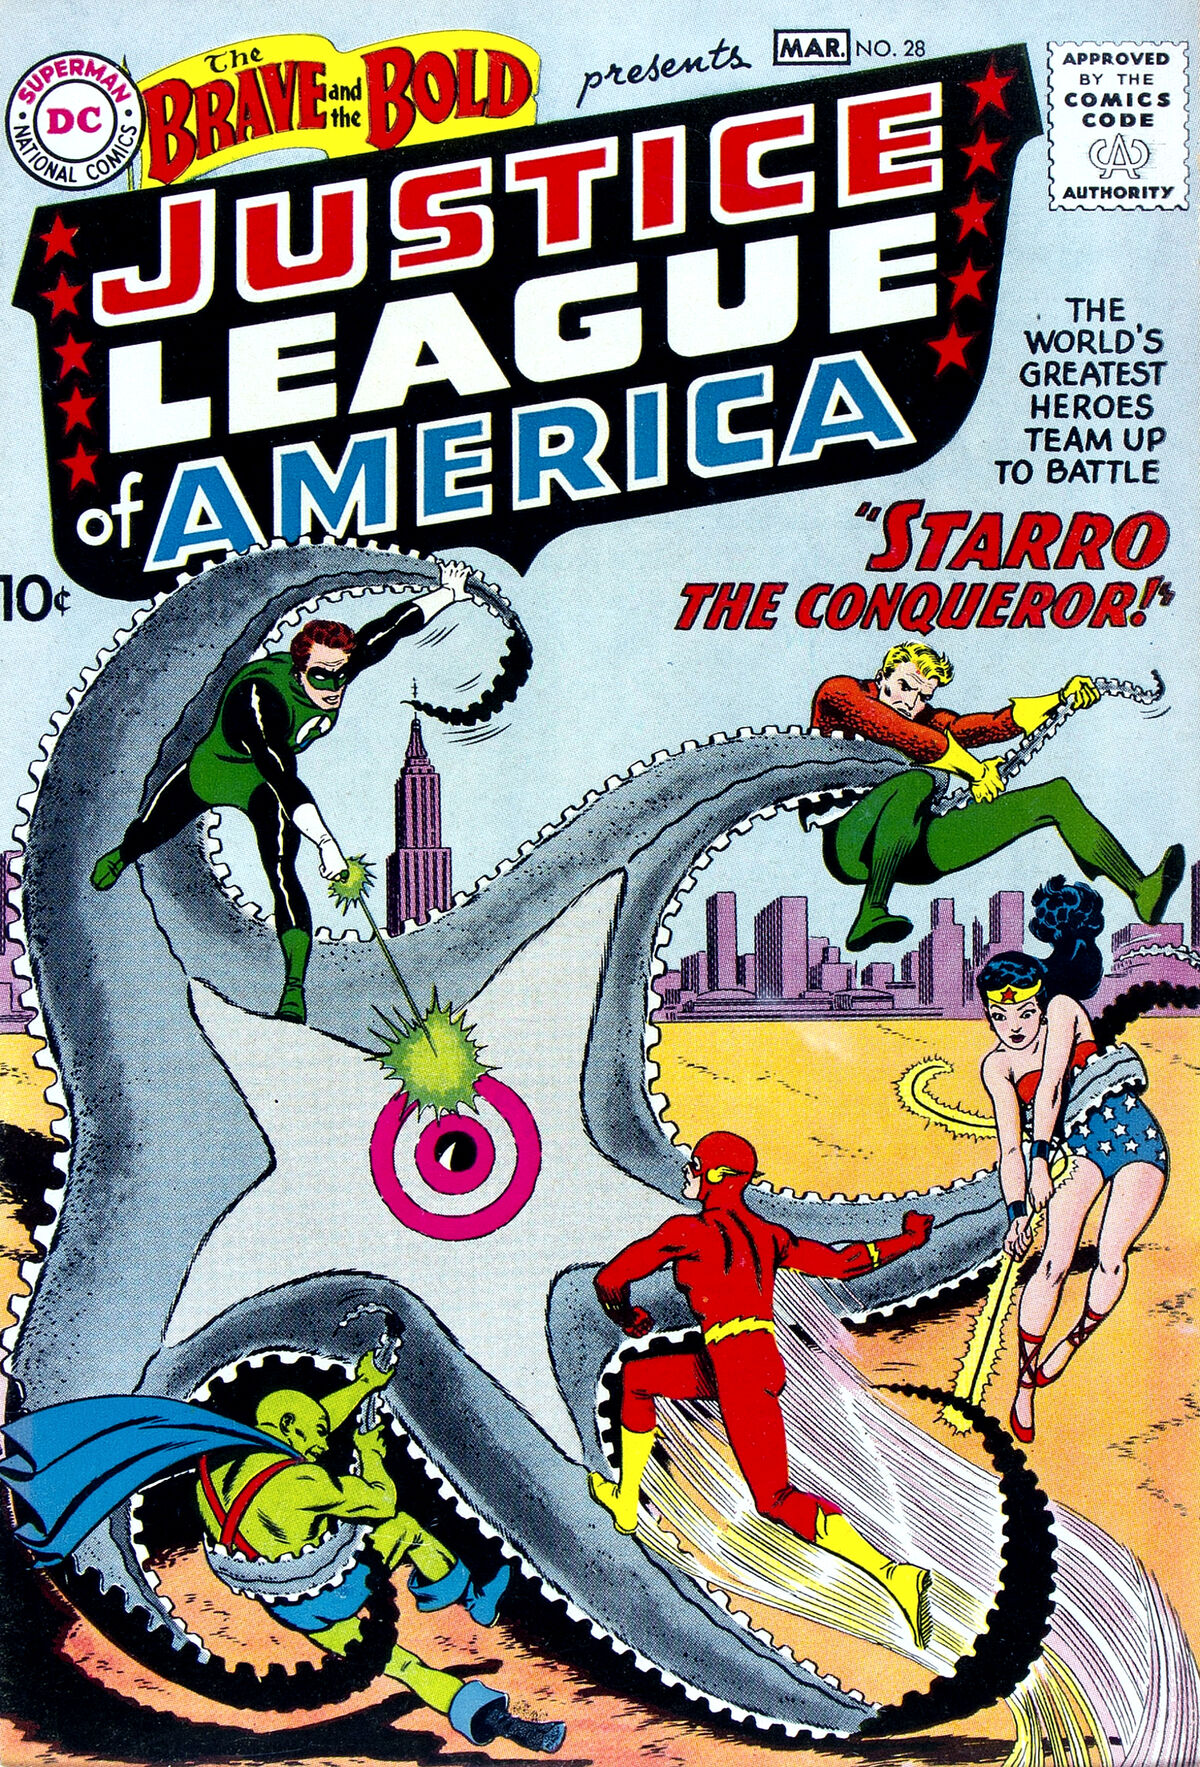 Back Issues [JLA Day]: The Brave and the Bold #28 – Dr. K's Waiting Room